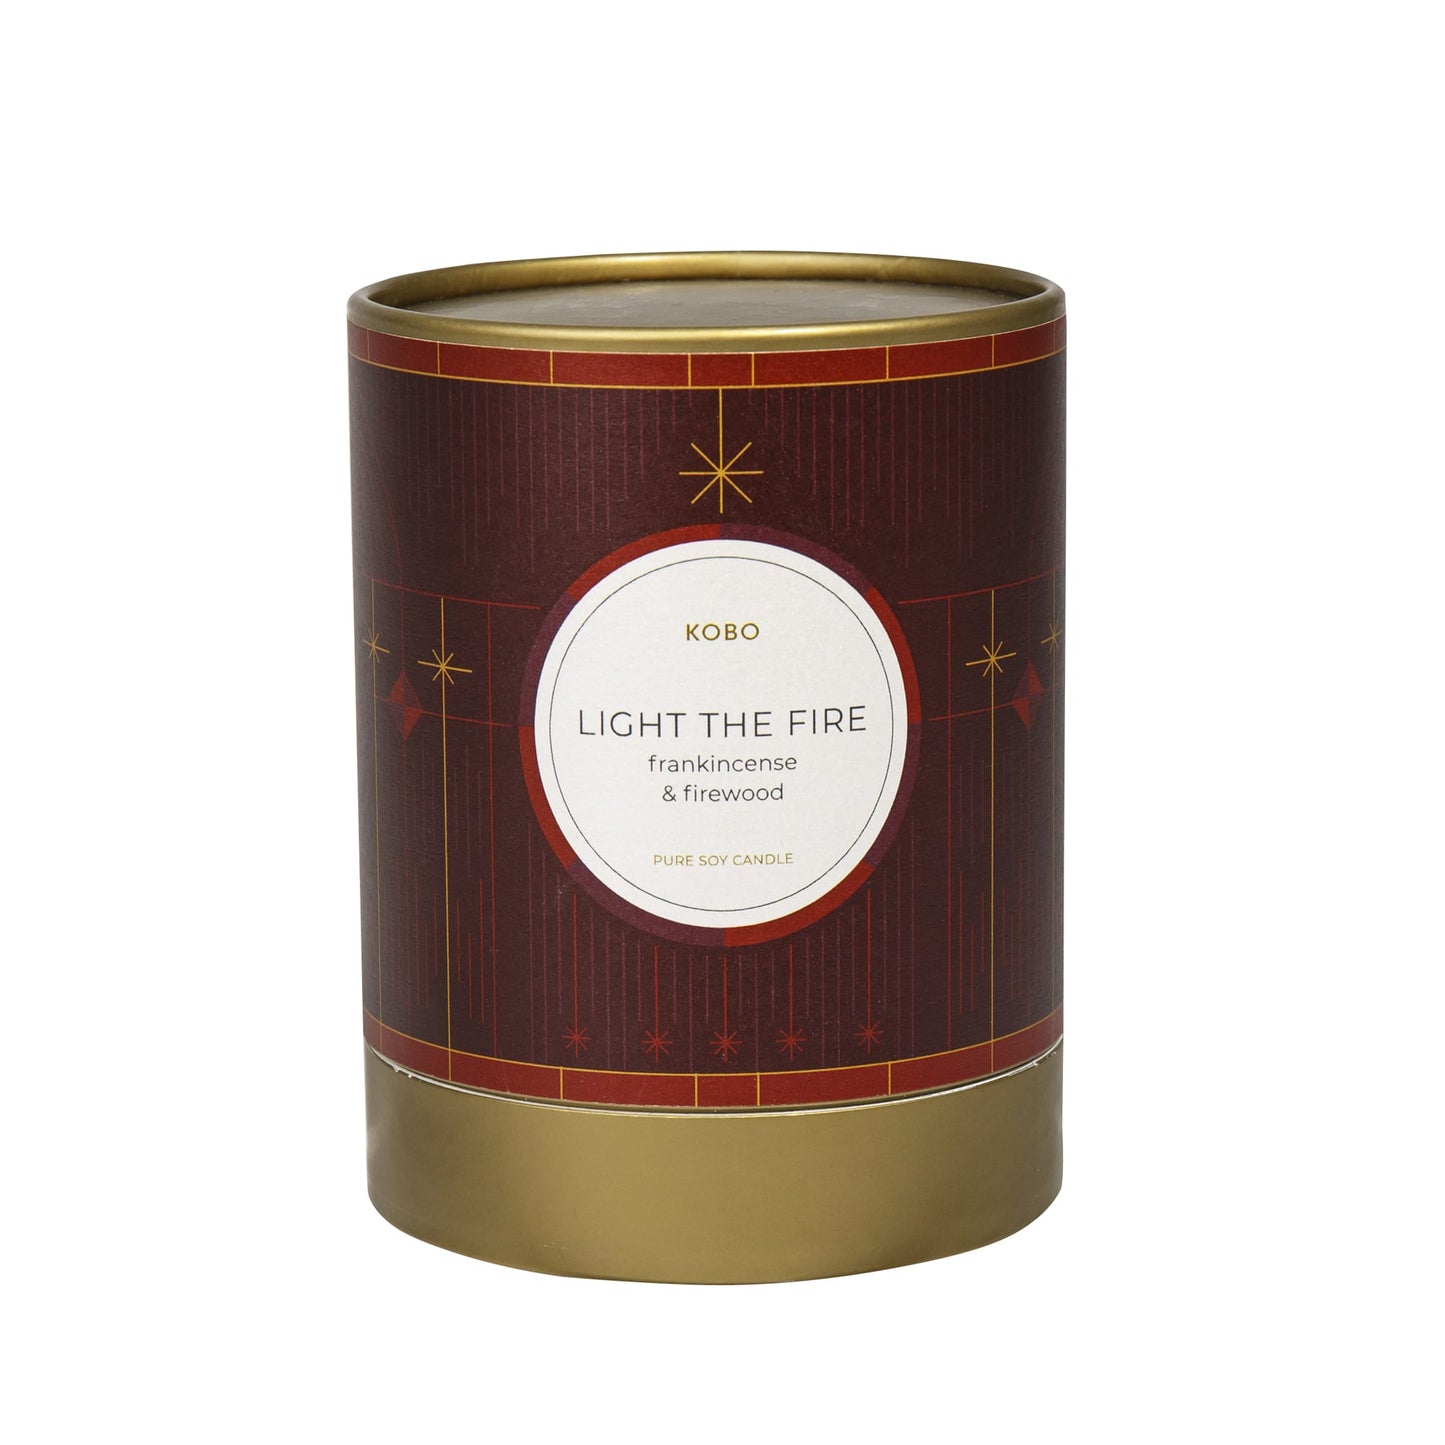 Alternate Image of Light the Fire 11 oz Pure Soy Candle